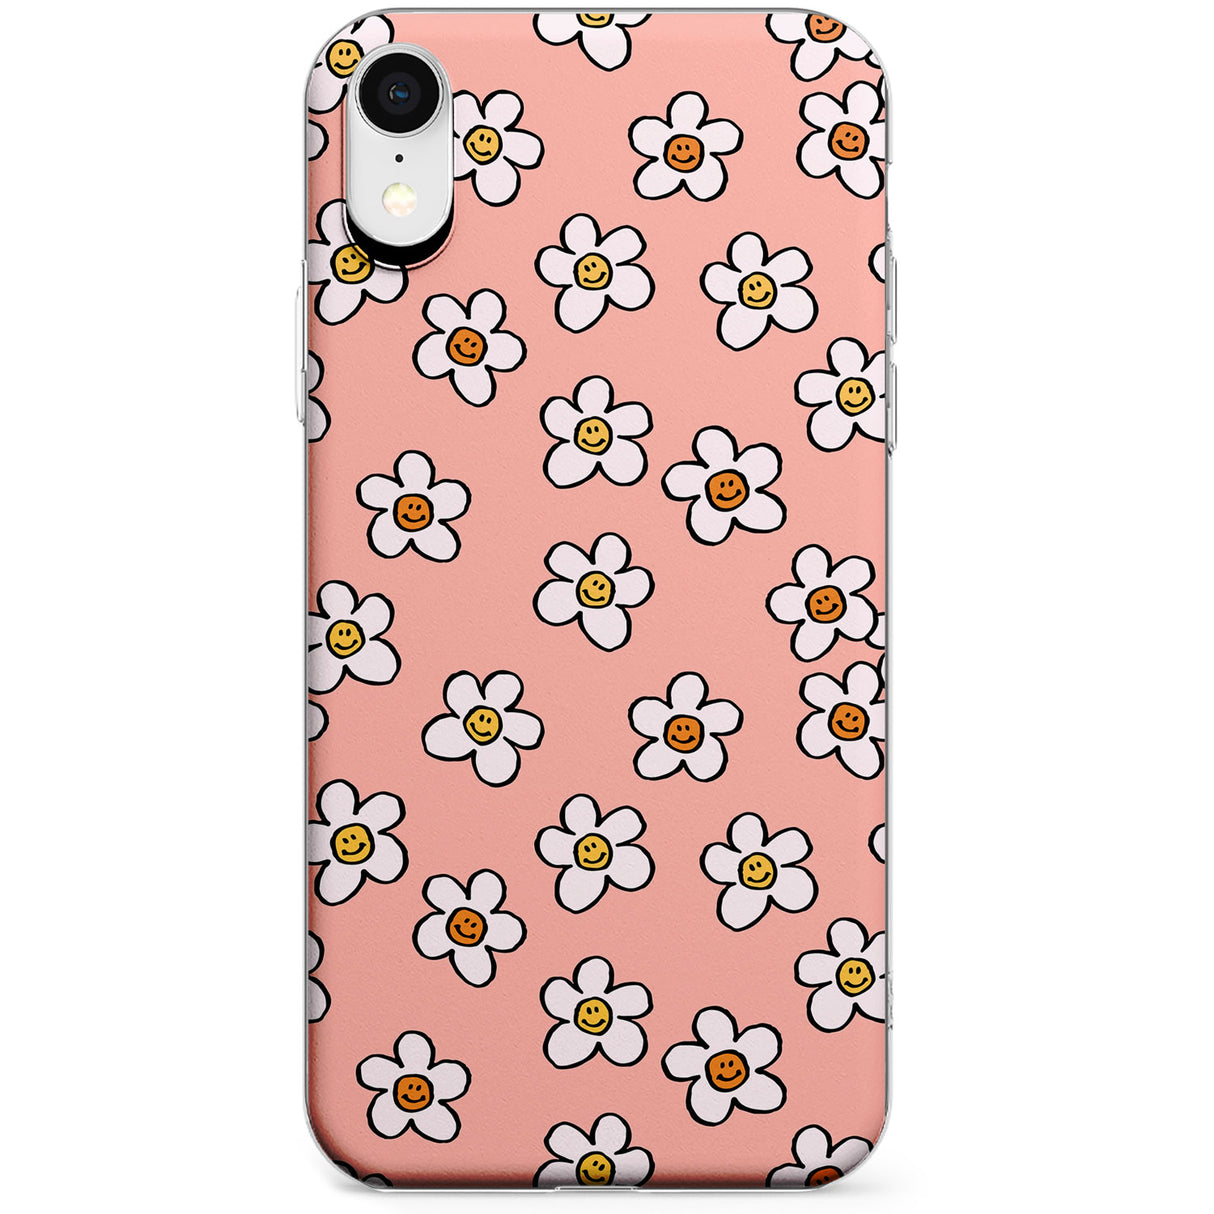 Peachy Daisy Smiles Phone Case for iPhone X, XS Max, XR